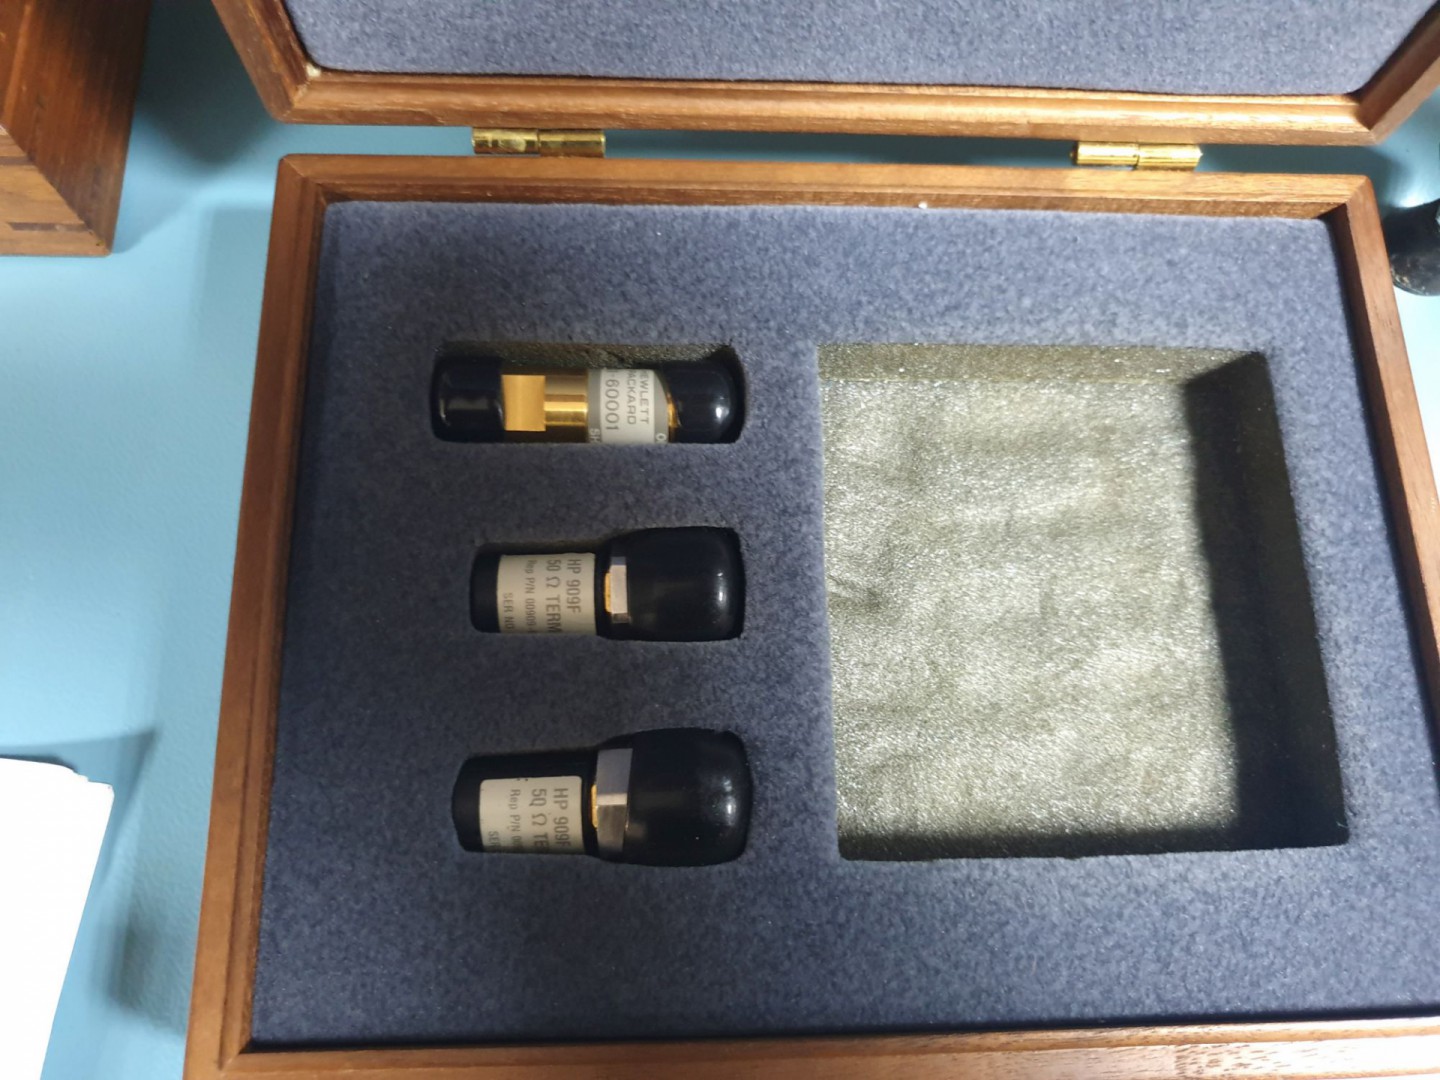 HP 85031B calibration kit, 7mm in wooden case